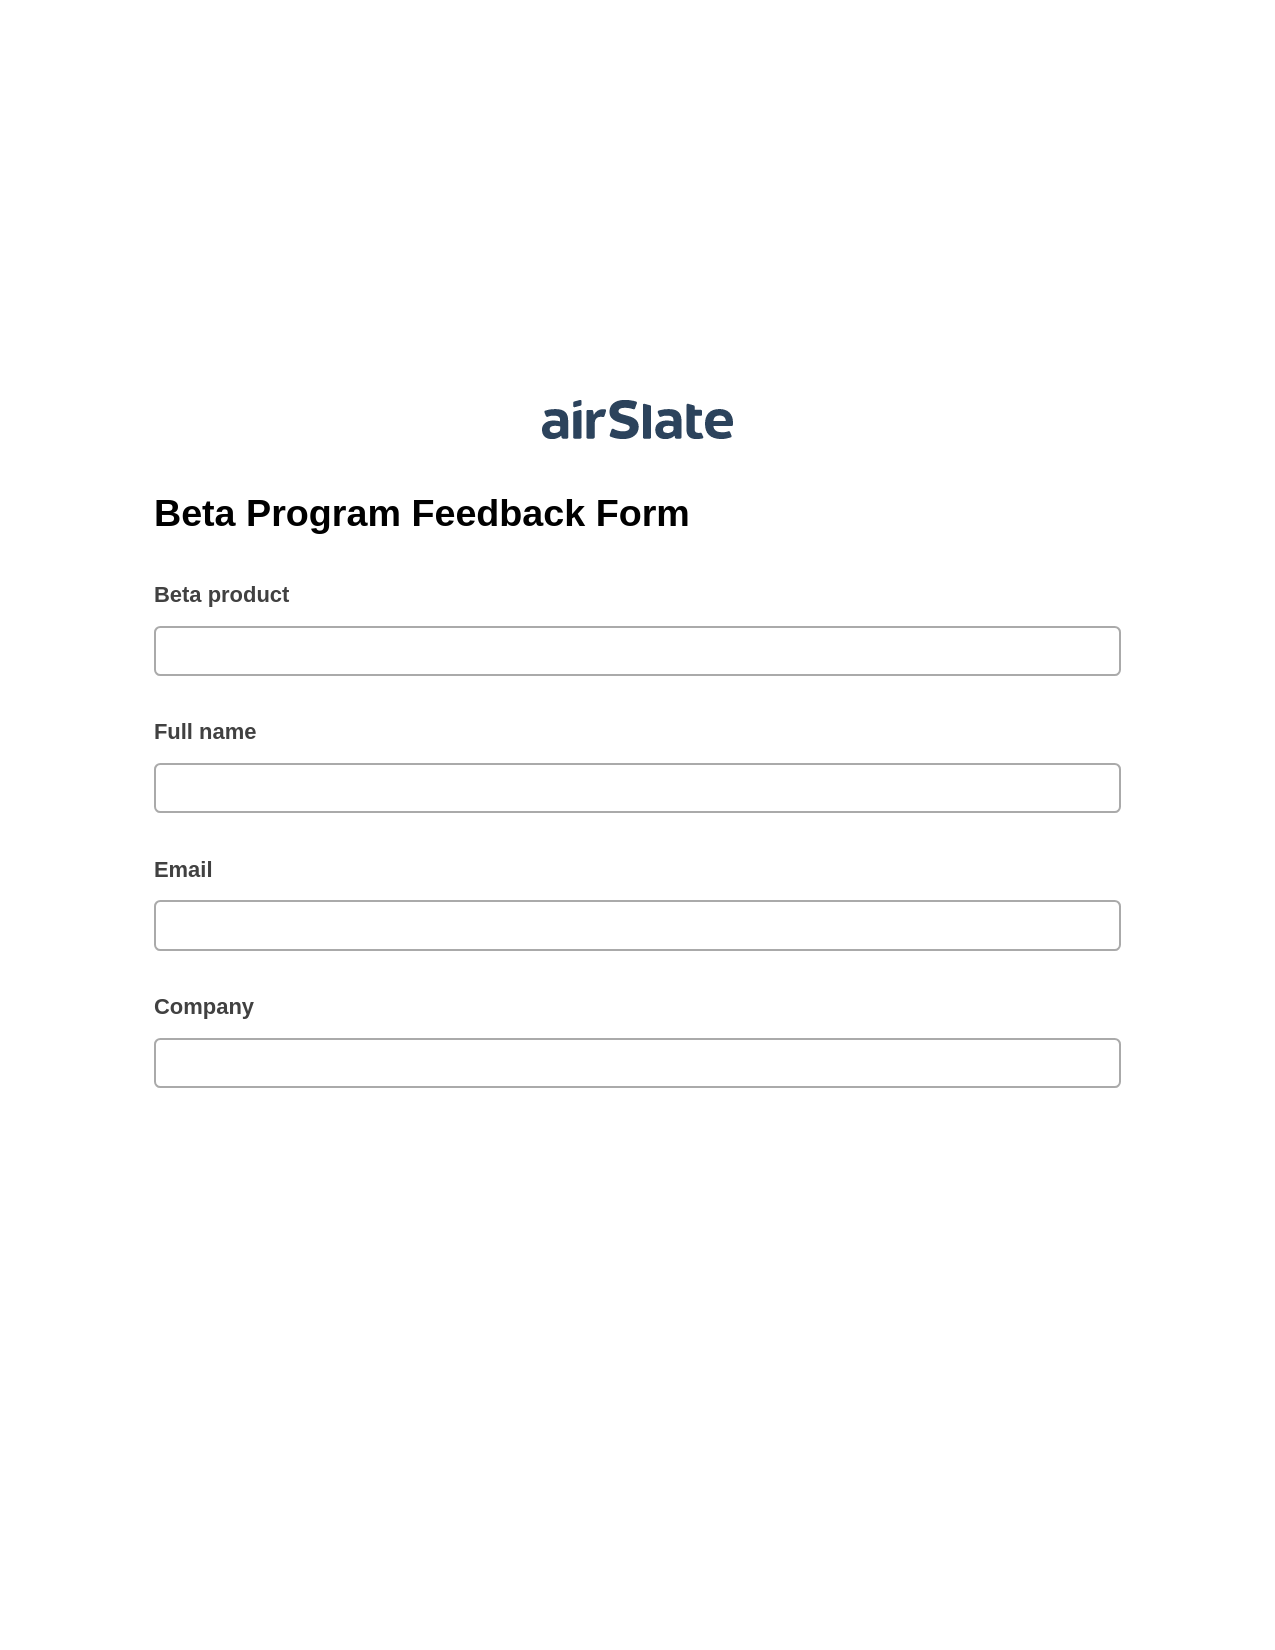 Beta Program Feedback Form Pre-fill from Office 365 Excel Bot, Send Mailchimp Campaign Bot, Export to Excel 365 Bot